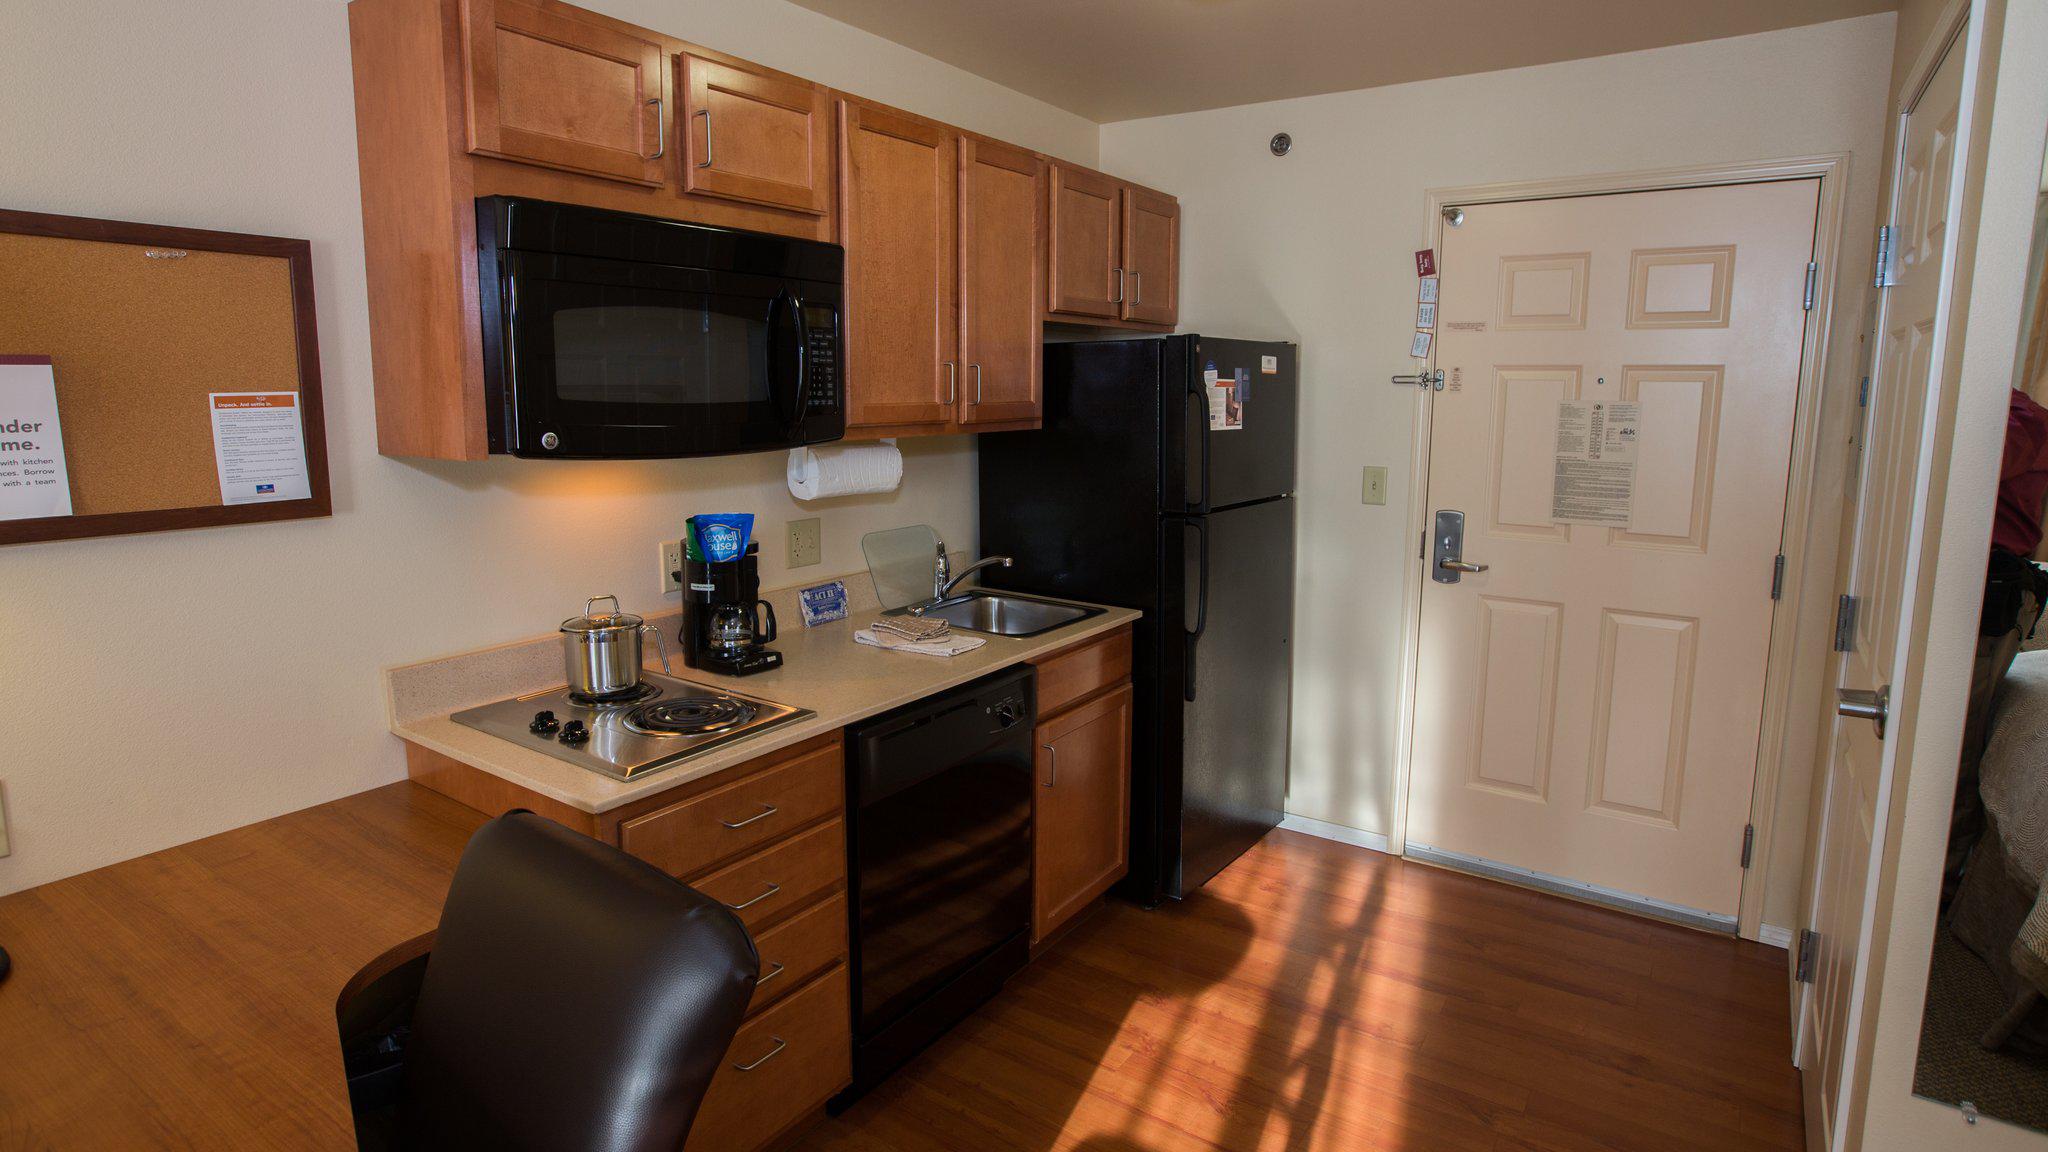 Candlewood Suites Springfield Photo